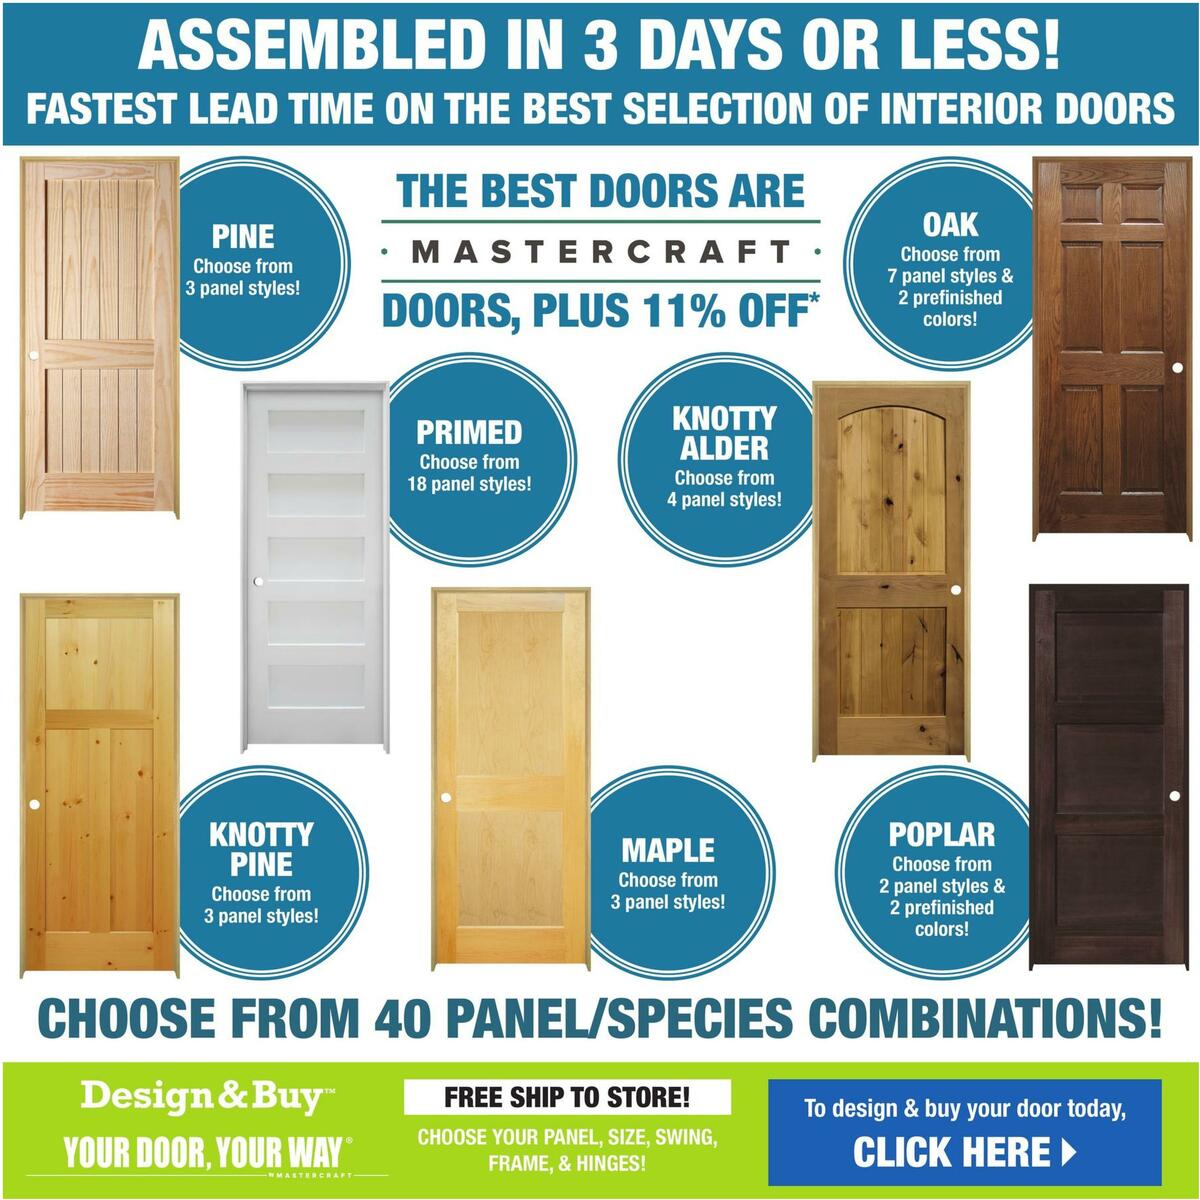 Menards Weekly Ad from February 21